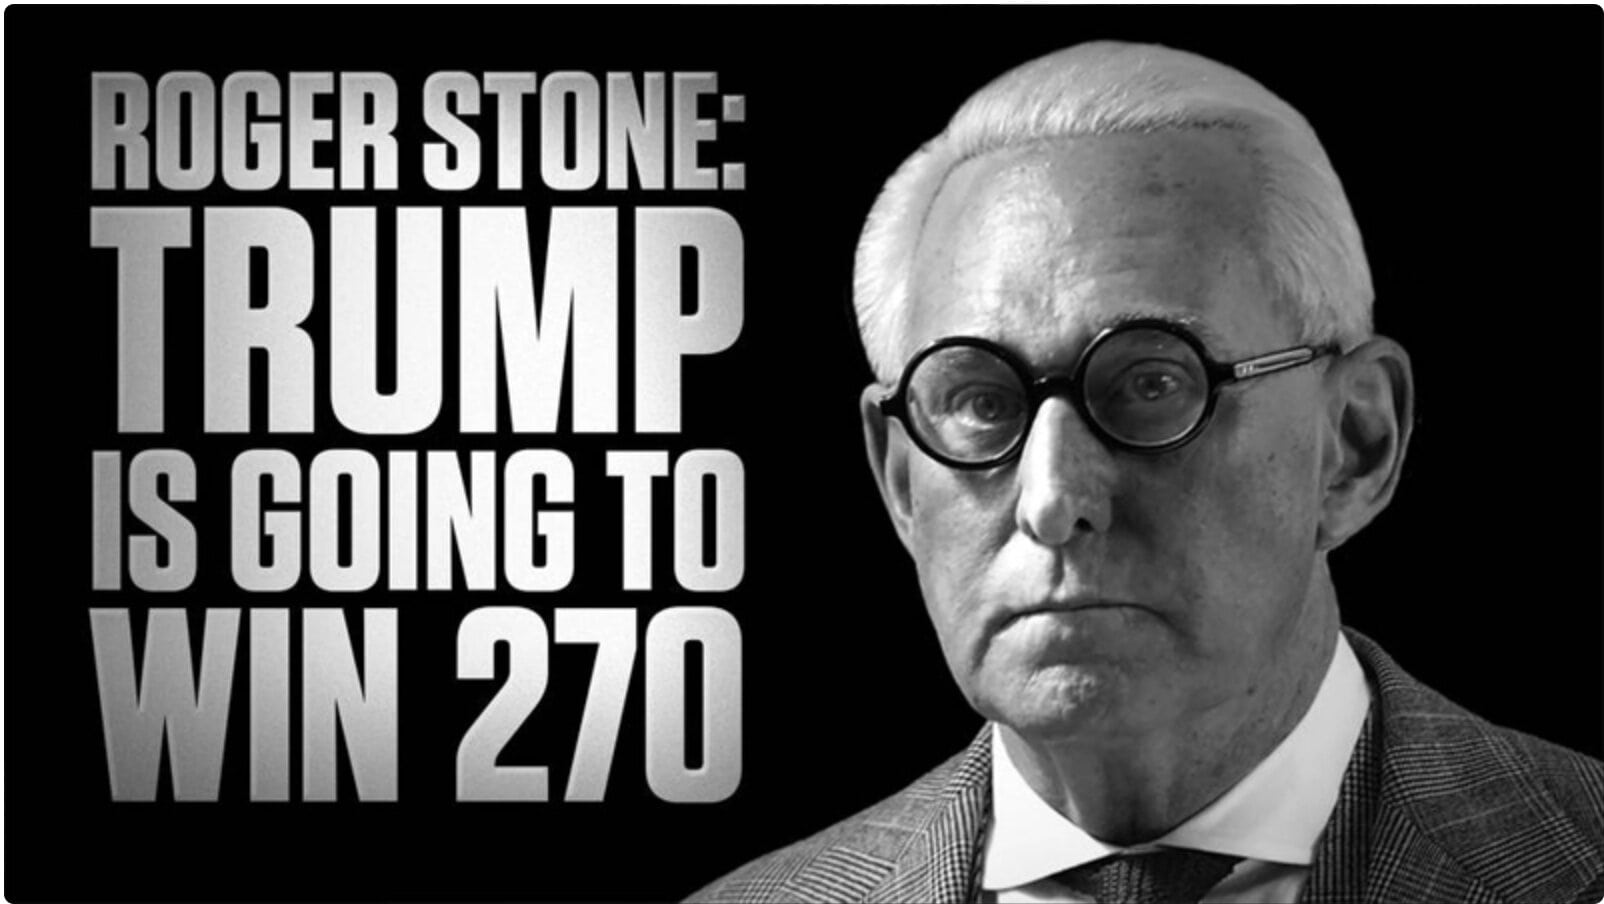 BREAKING! Roger Stone: Trump Is Going To Win 270